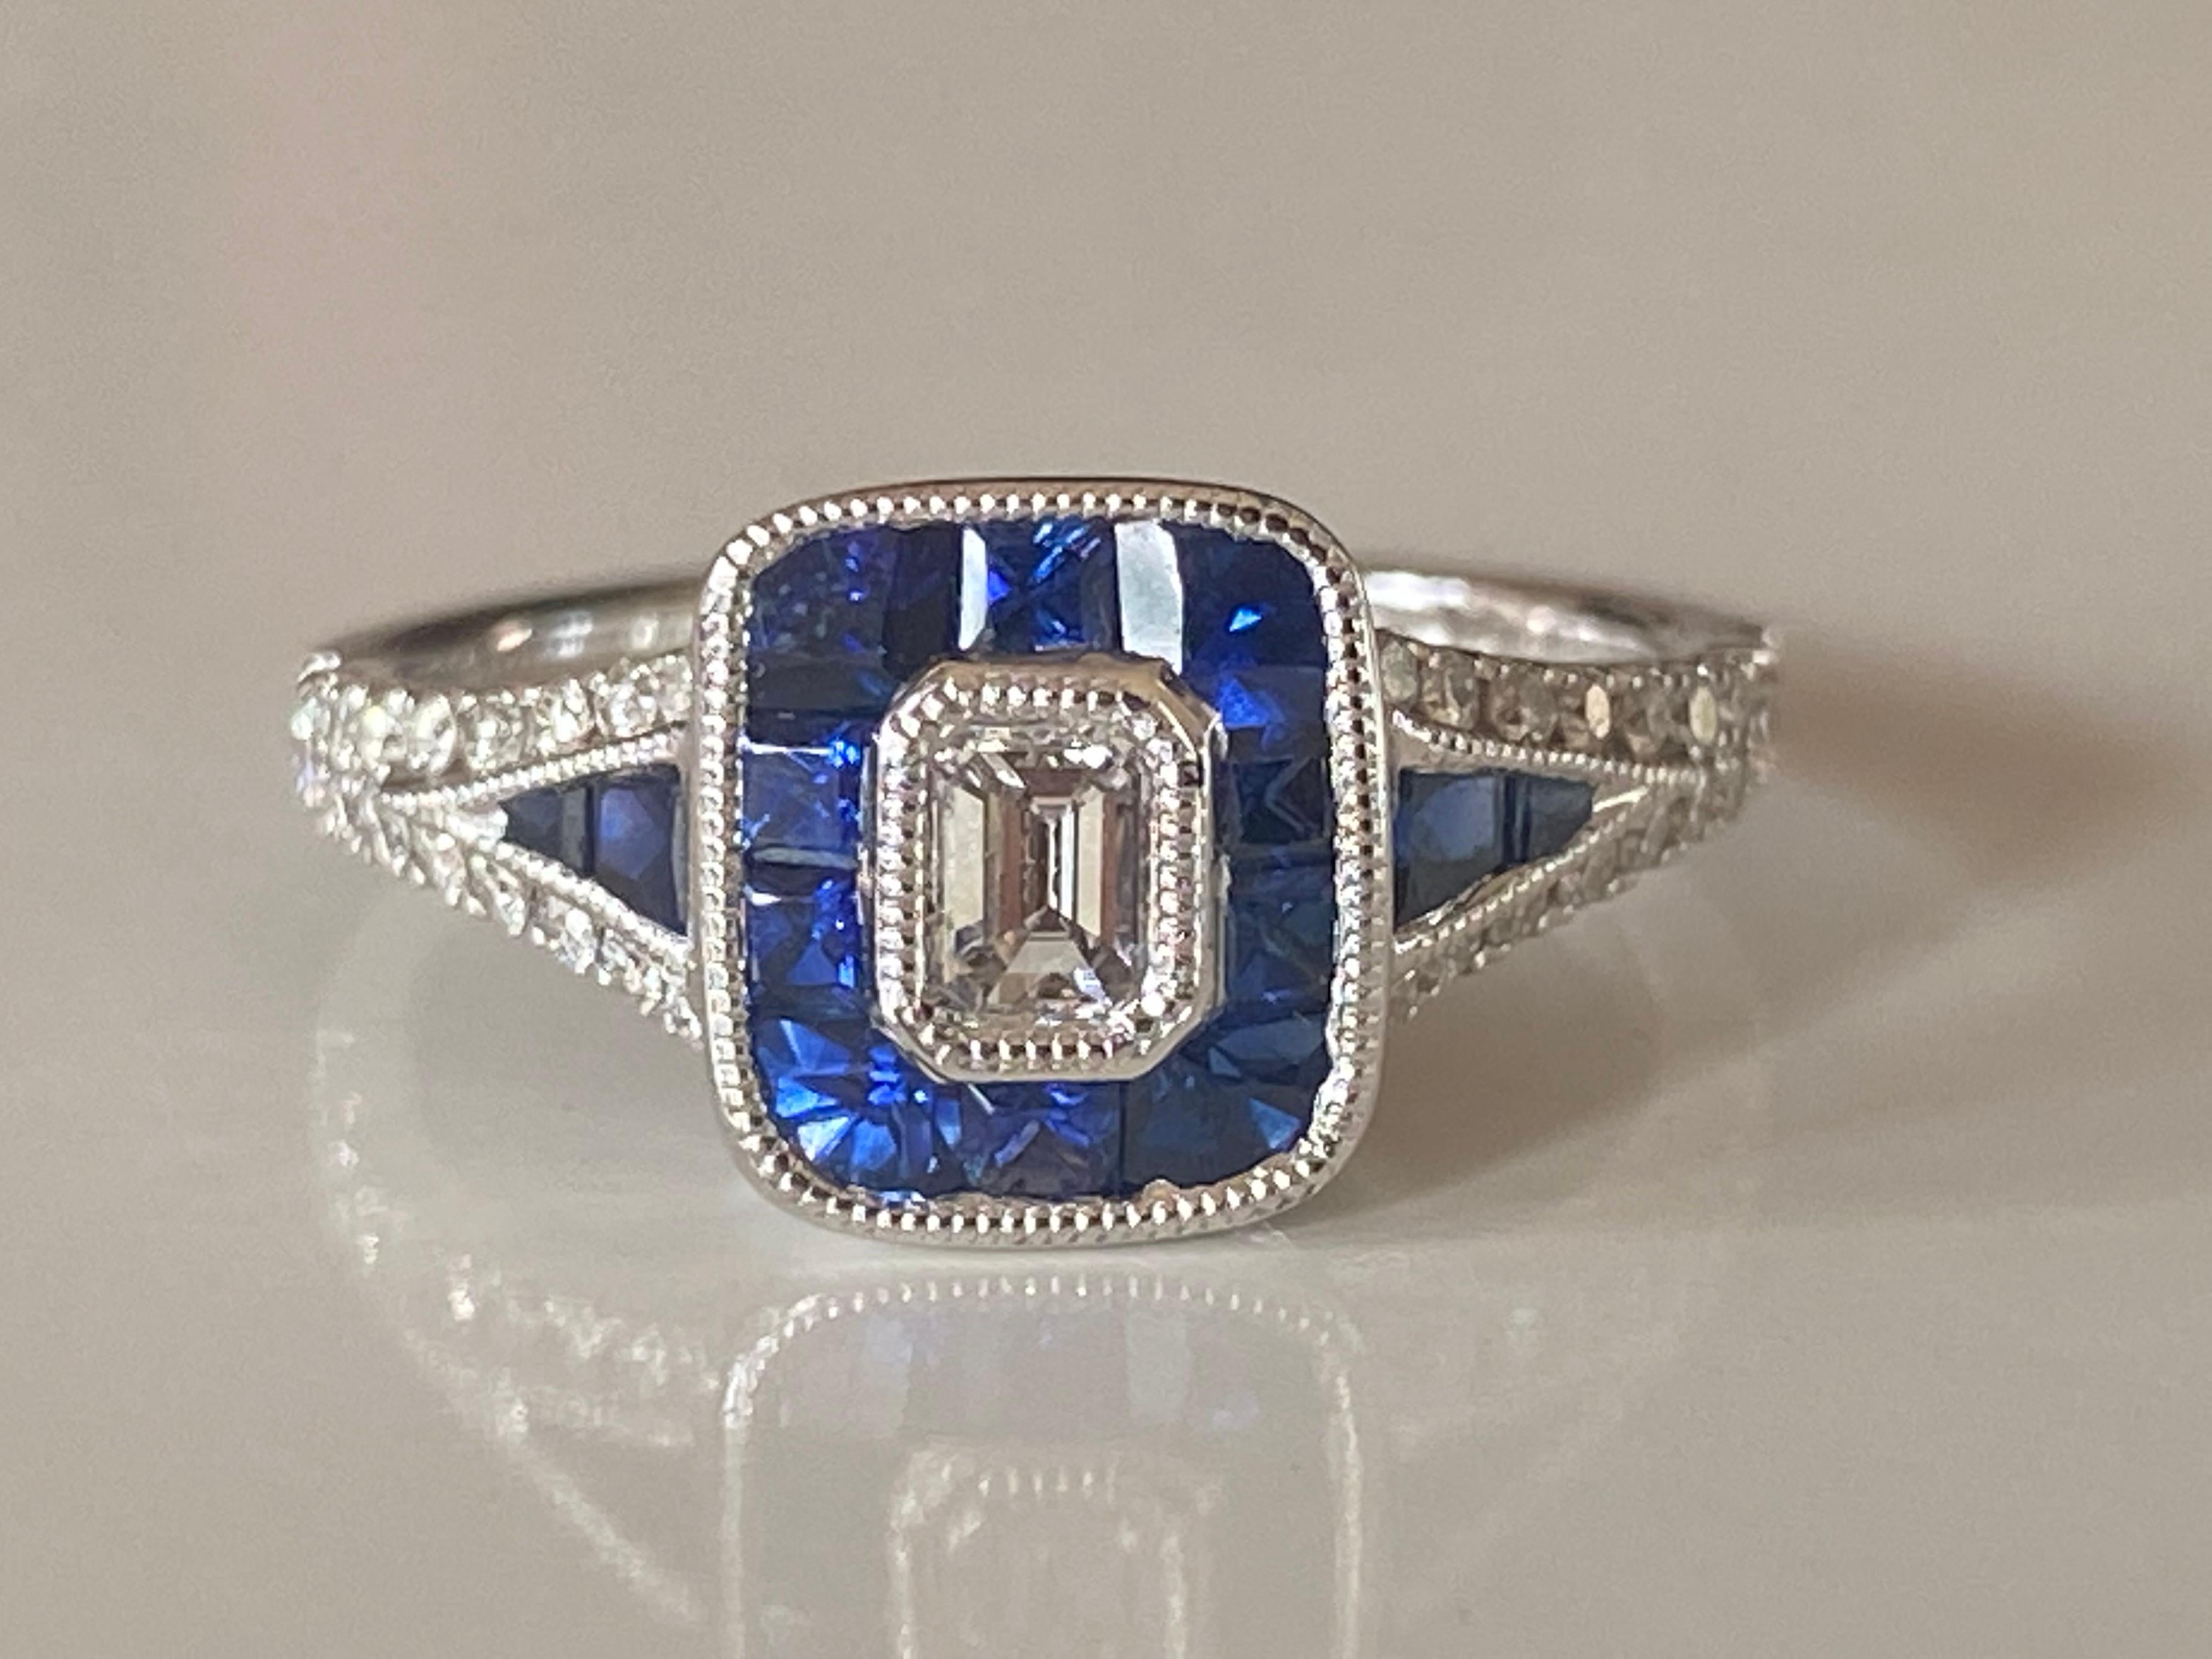 This sparkling gem set in 18kt white gold is designed around an emerald cut white diamond center stone surrounded by a halo of calibrated blue sapphires. Additional sapphires adorn the shoulders in a tapered triangular design lined by glistening